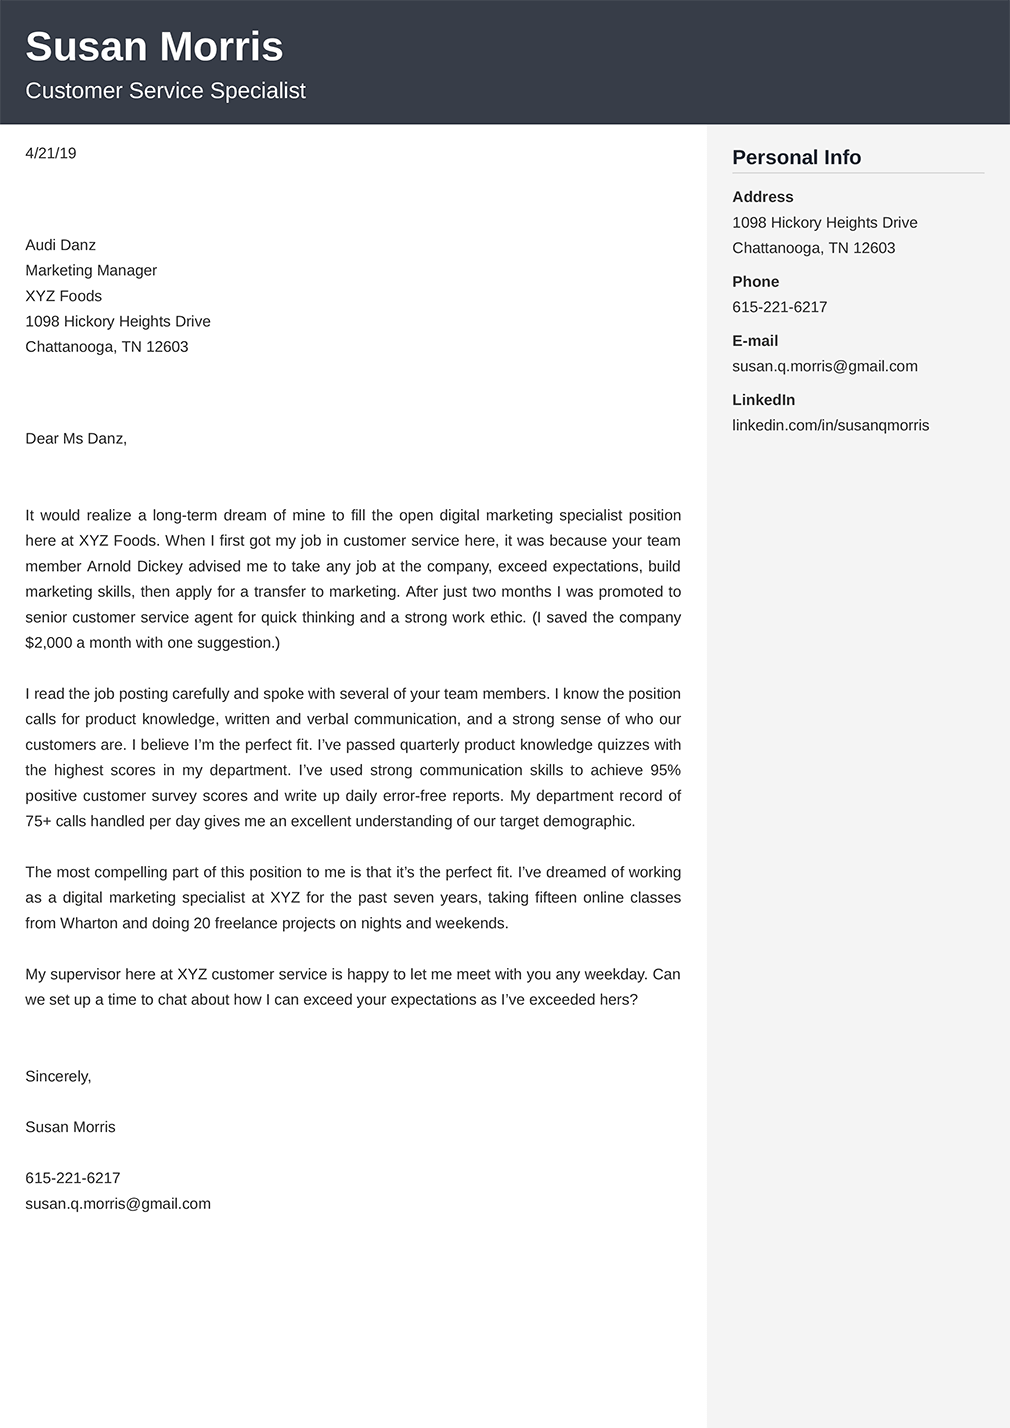 Sample Of Professional Cover Letter from cdn-images.zety.com